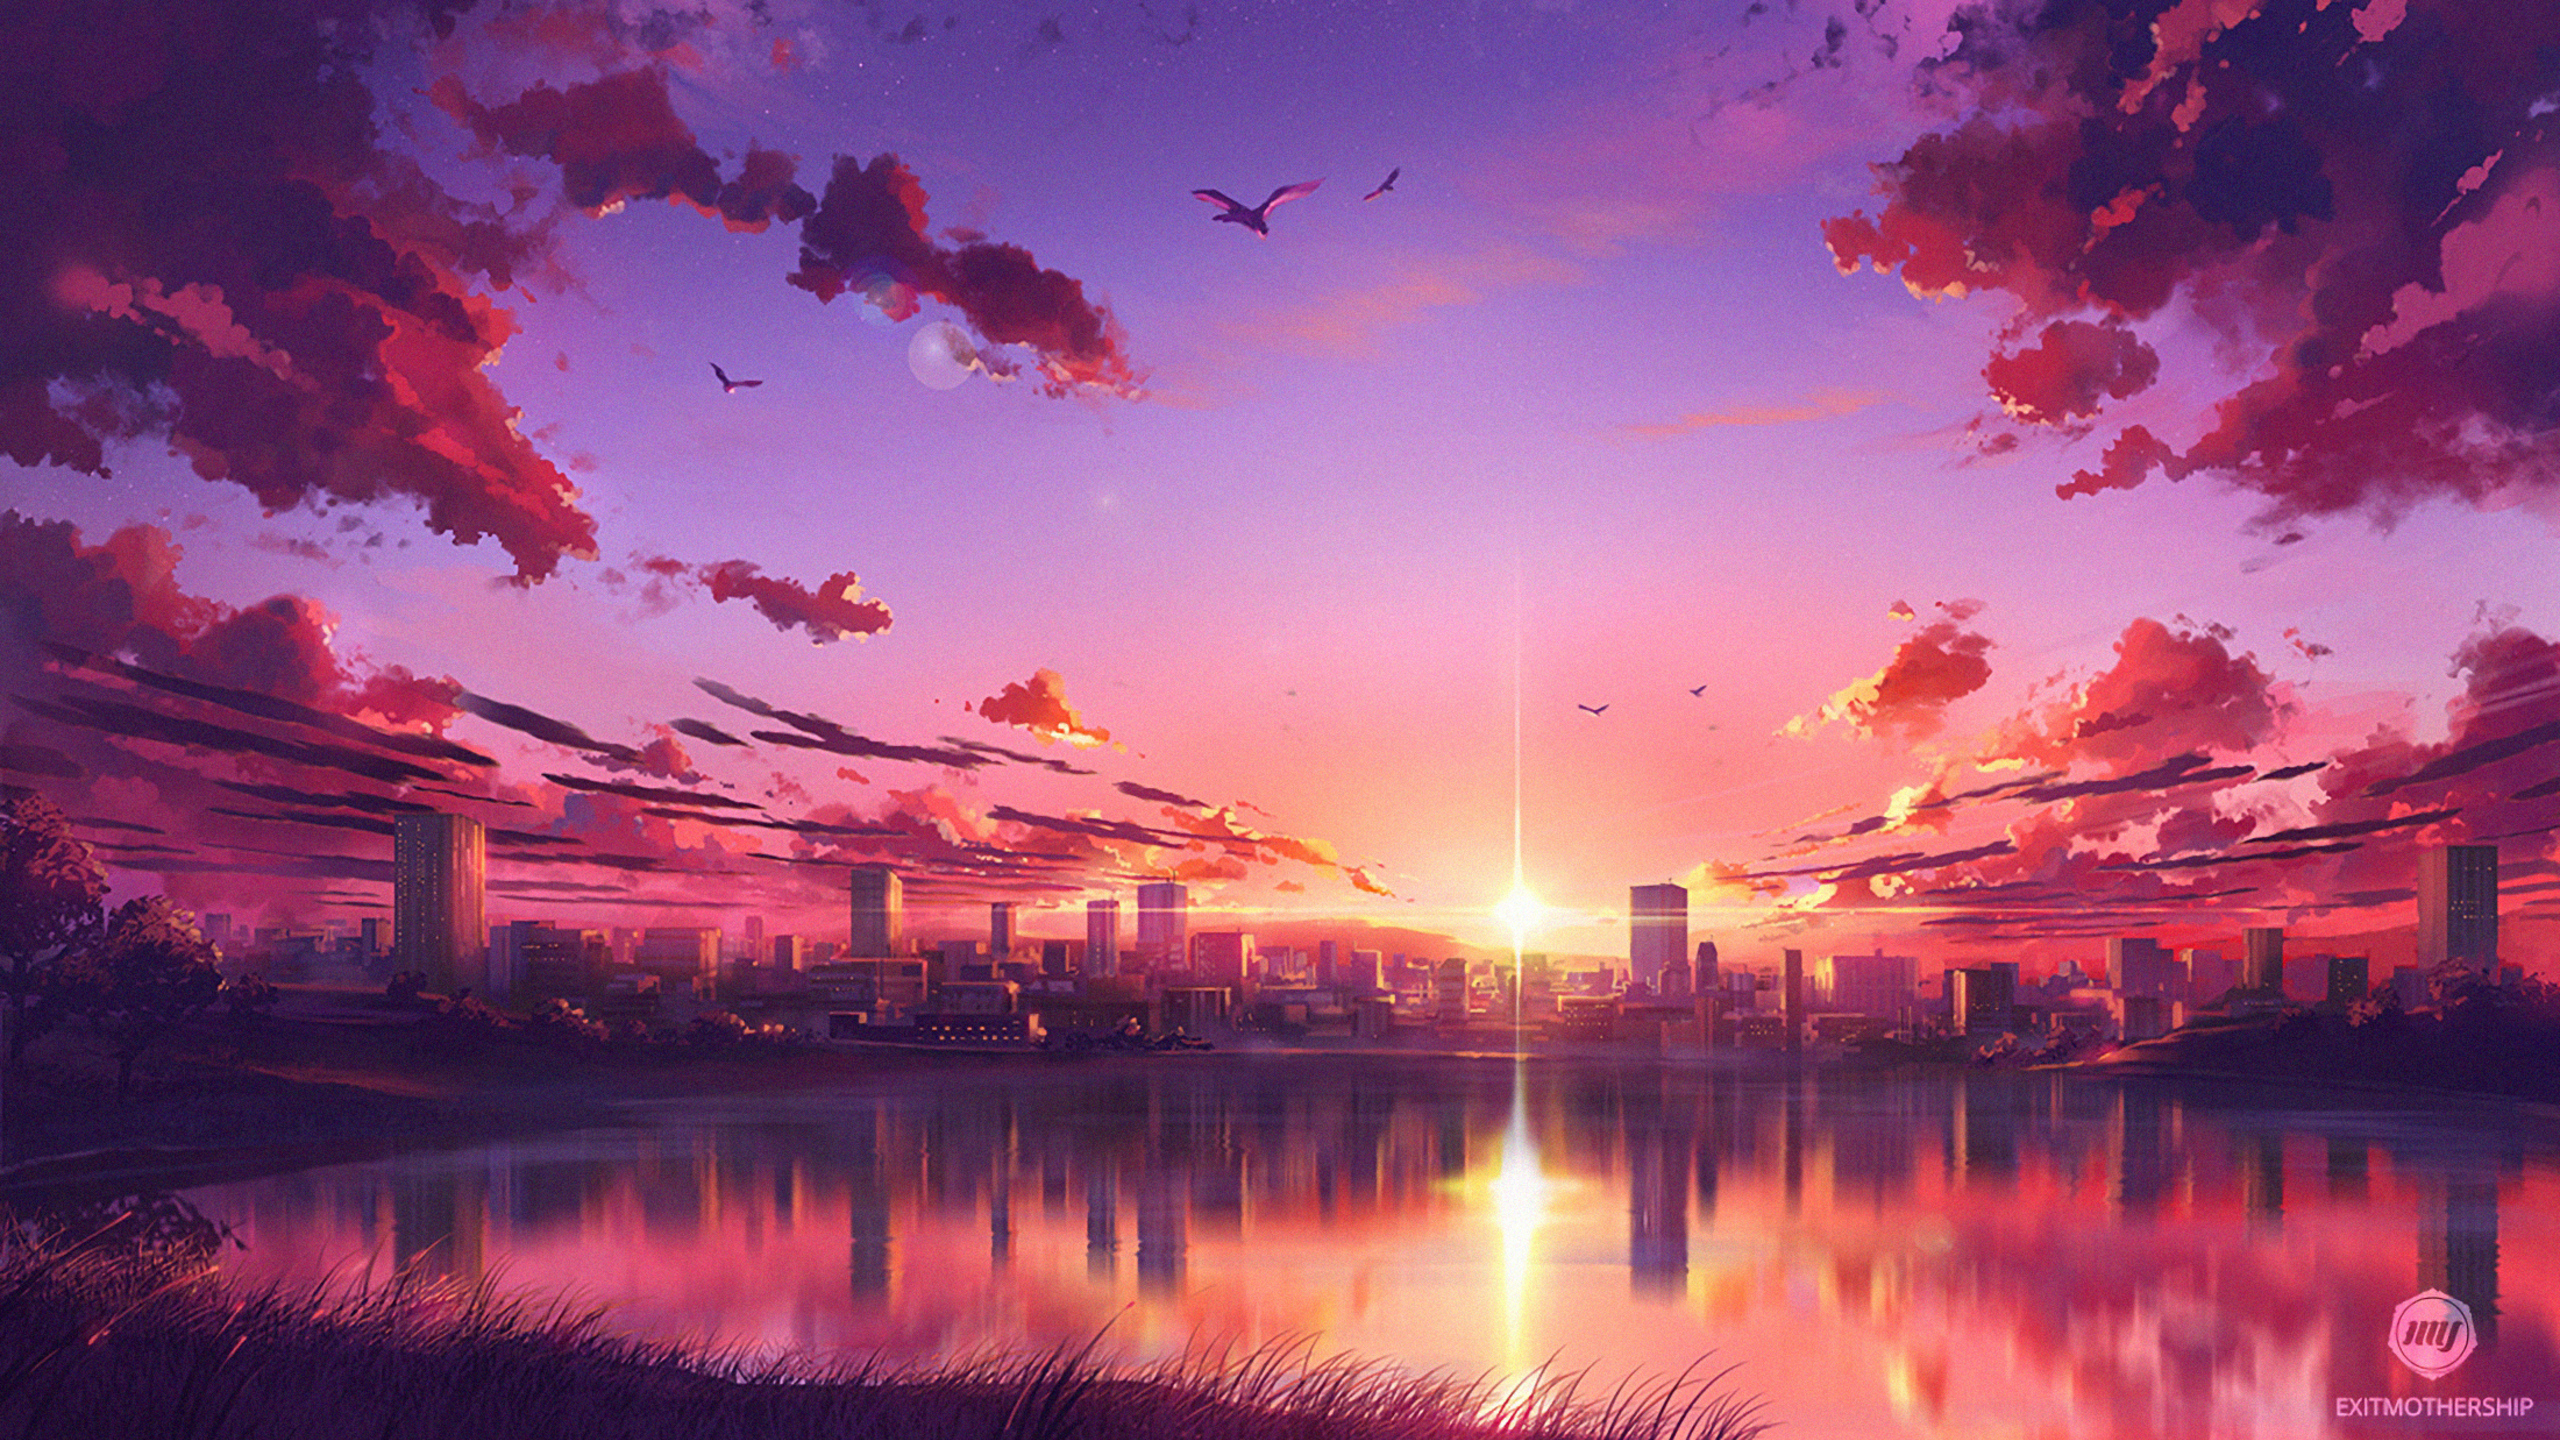 🔥 #1440p anime HD Photos & Wallpapers (165+ Images)